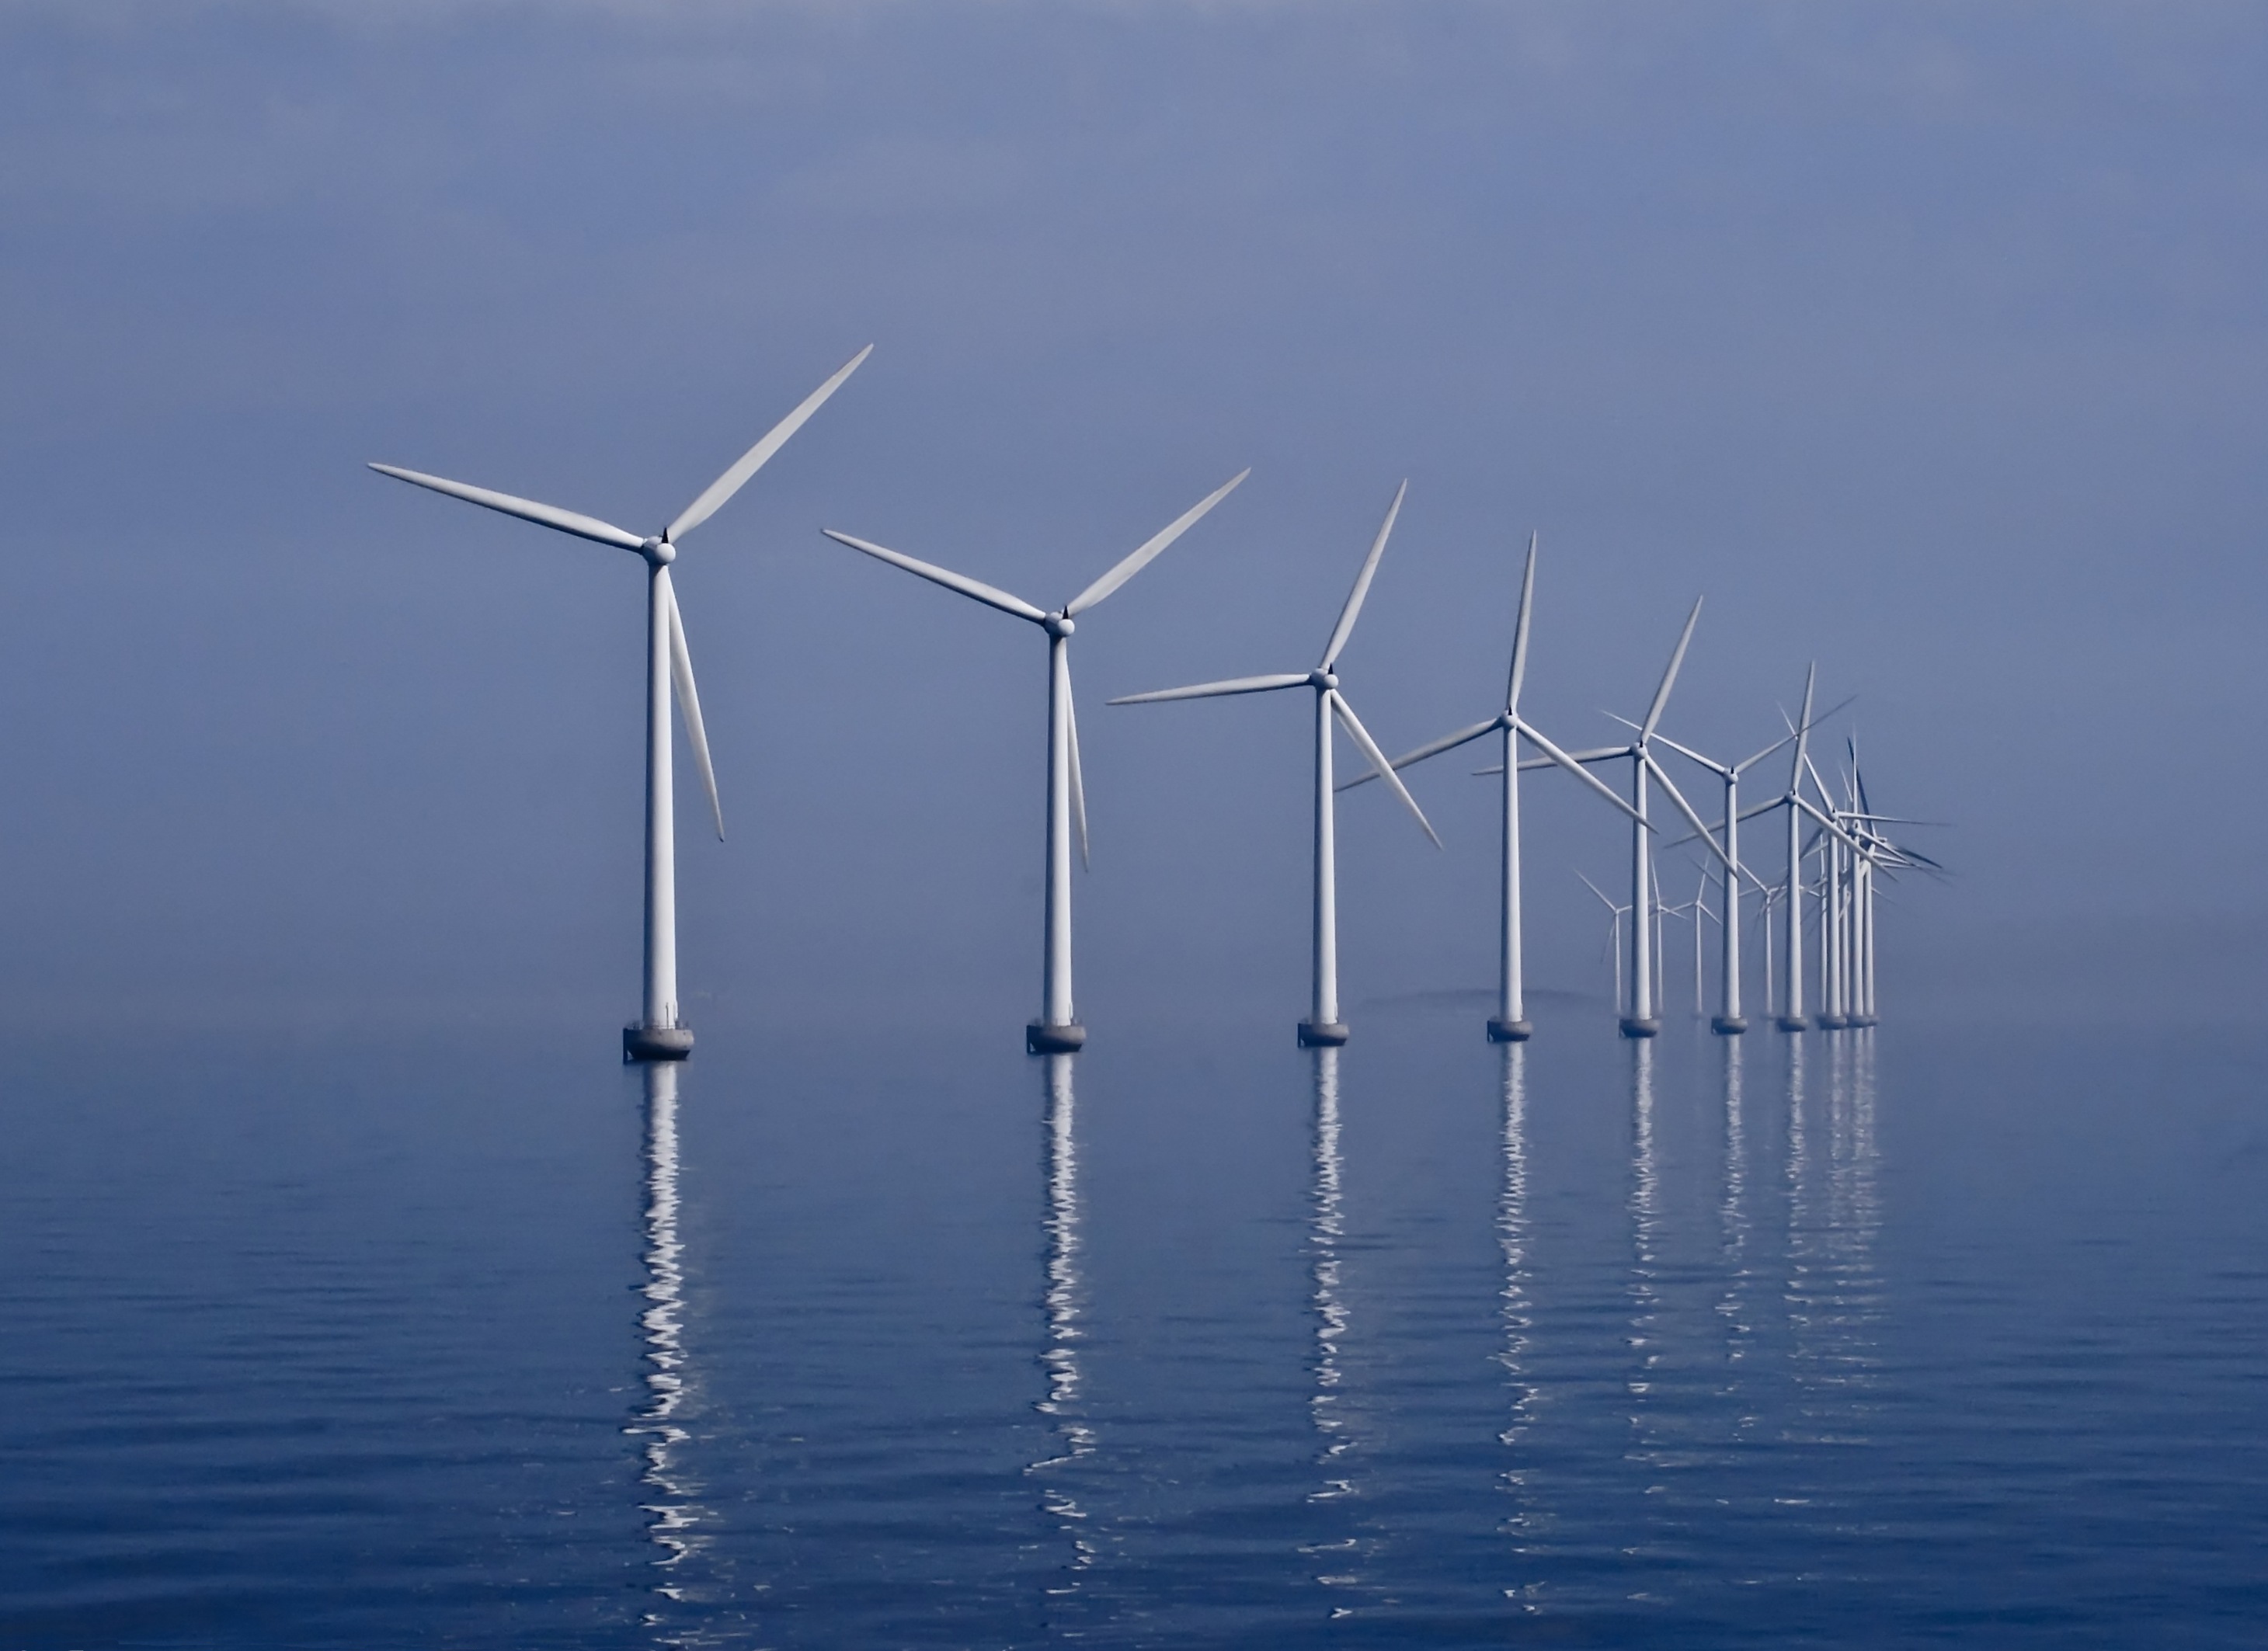 First Evidence That Offshore Wind Farms Are Changing the Oceans